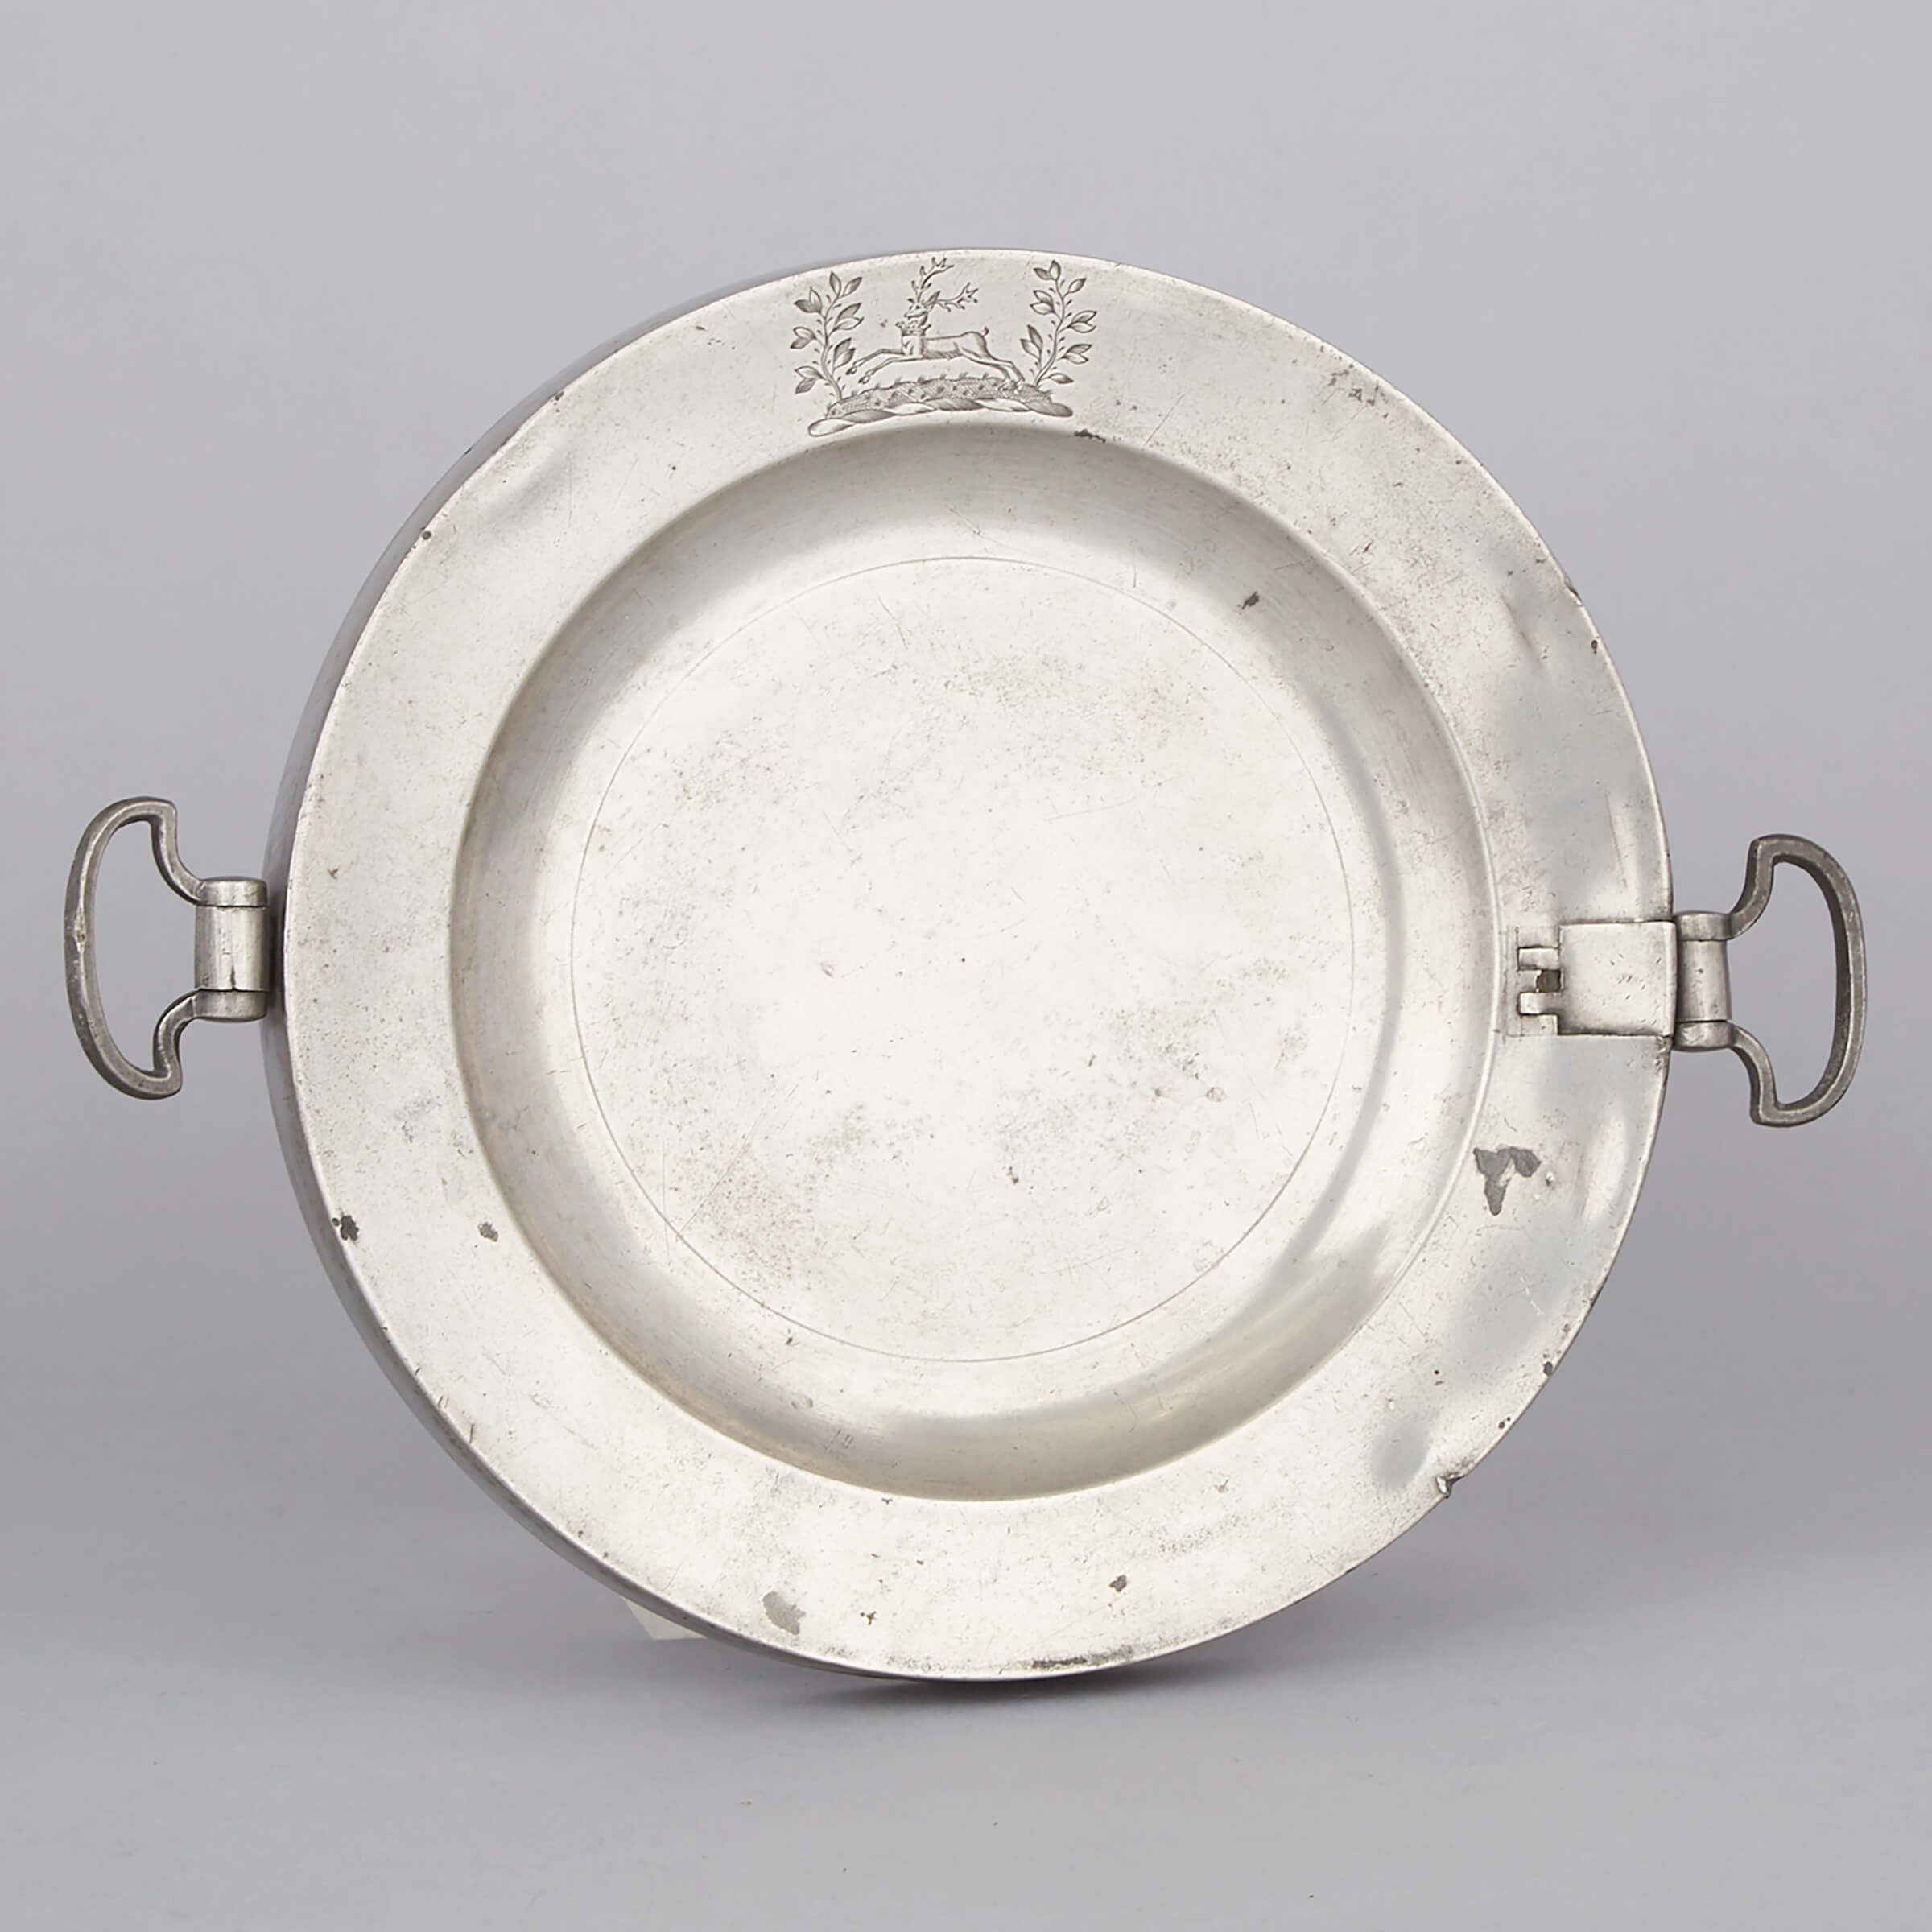 English Baronial Pewter Hot Water Plate, Hall and Scott, Exeter, mid 18th century